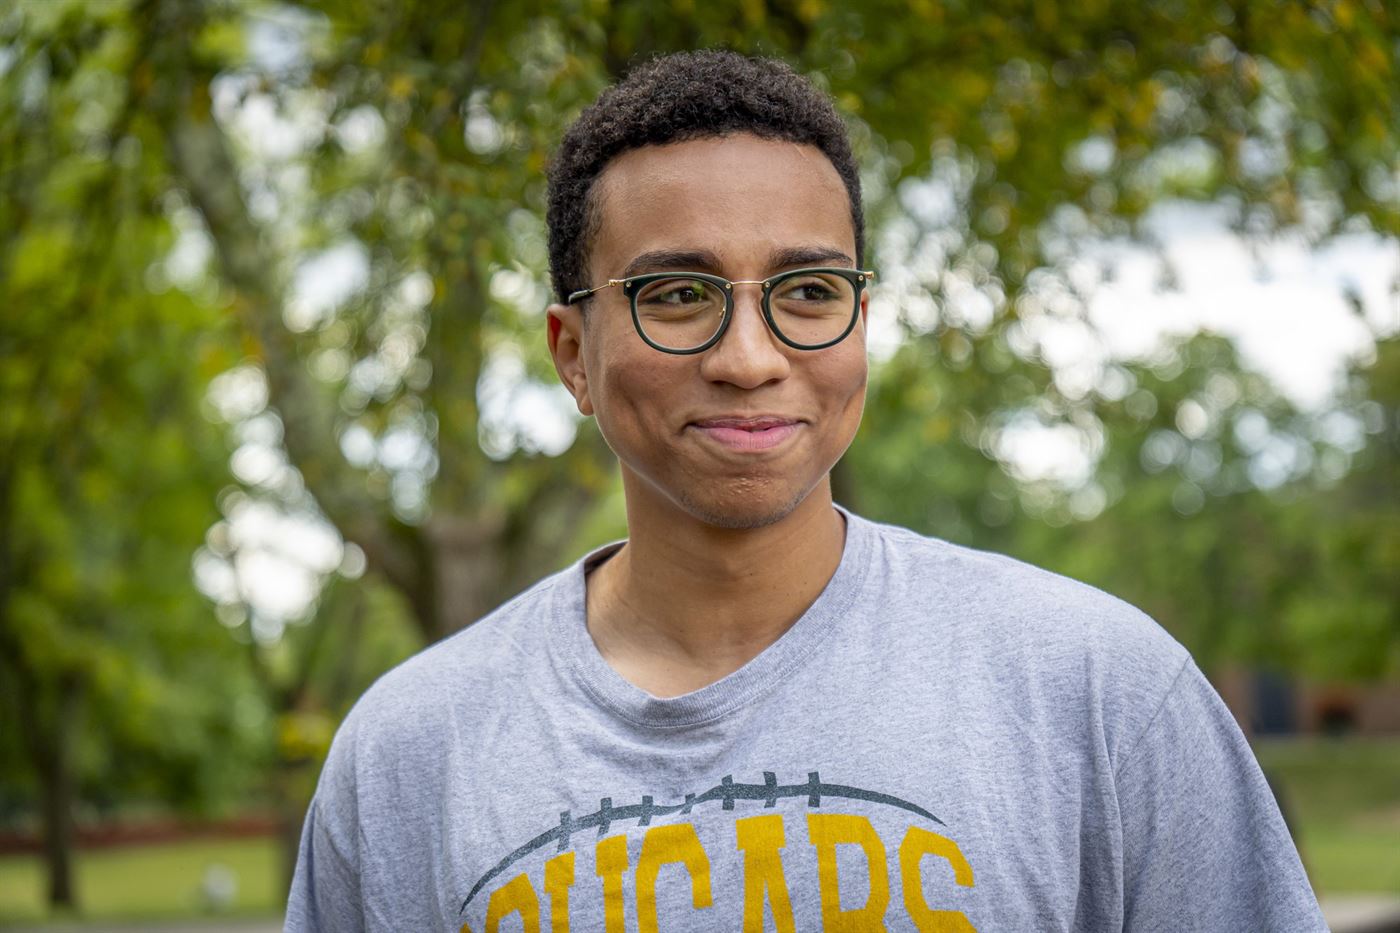 Muhaymin Shakur, a senior computer science major, explains his experience with a pattern fly while on a skateboard. Lynise Olivacce | The Montclarion